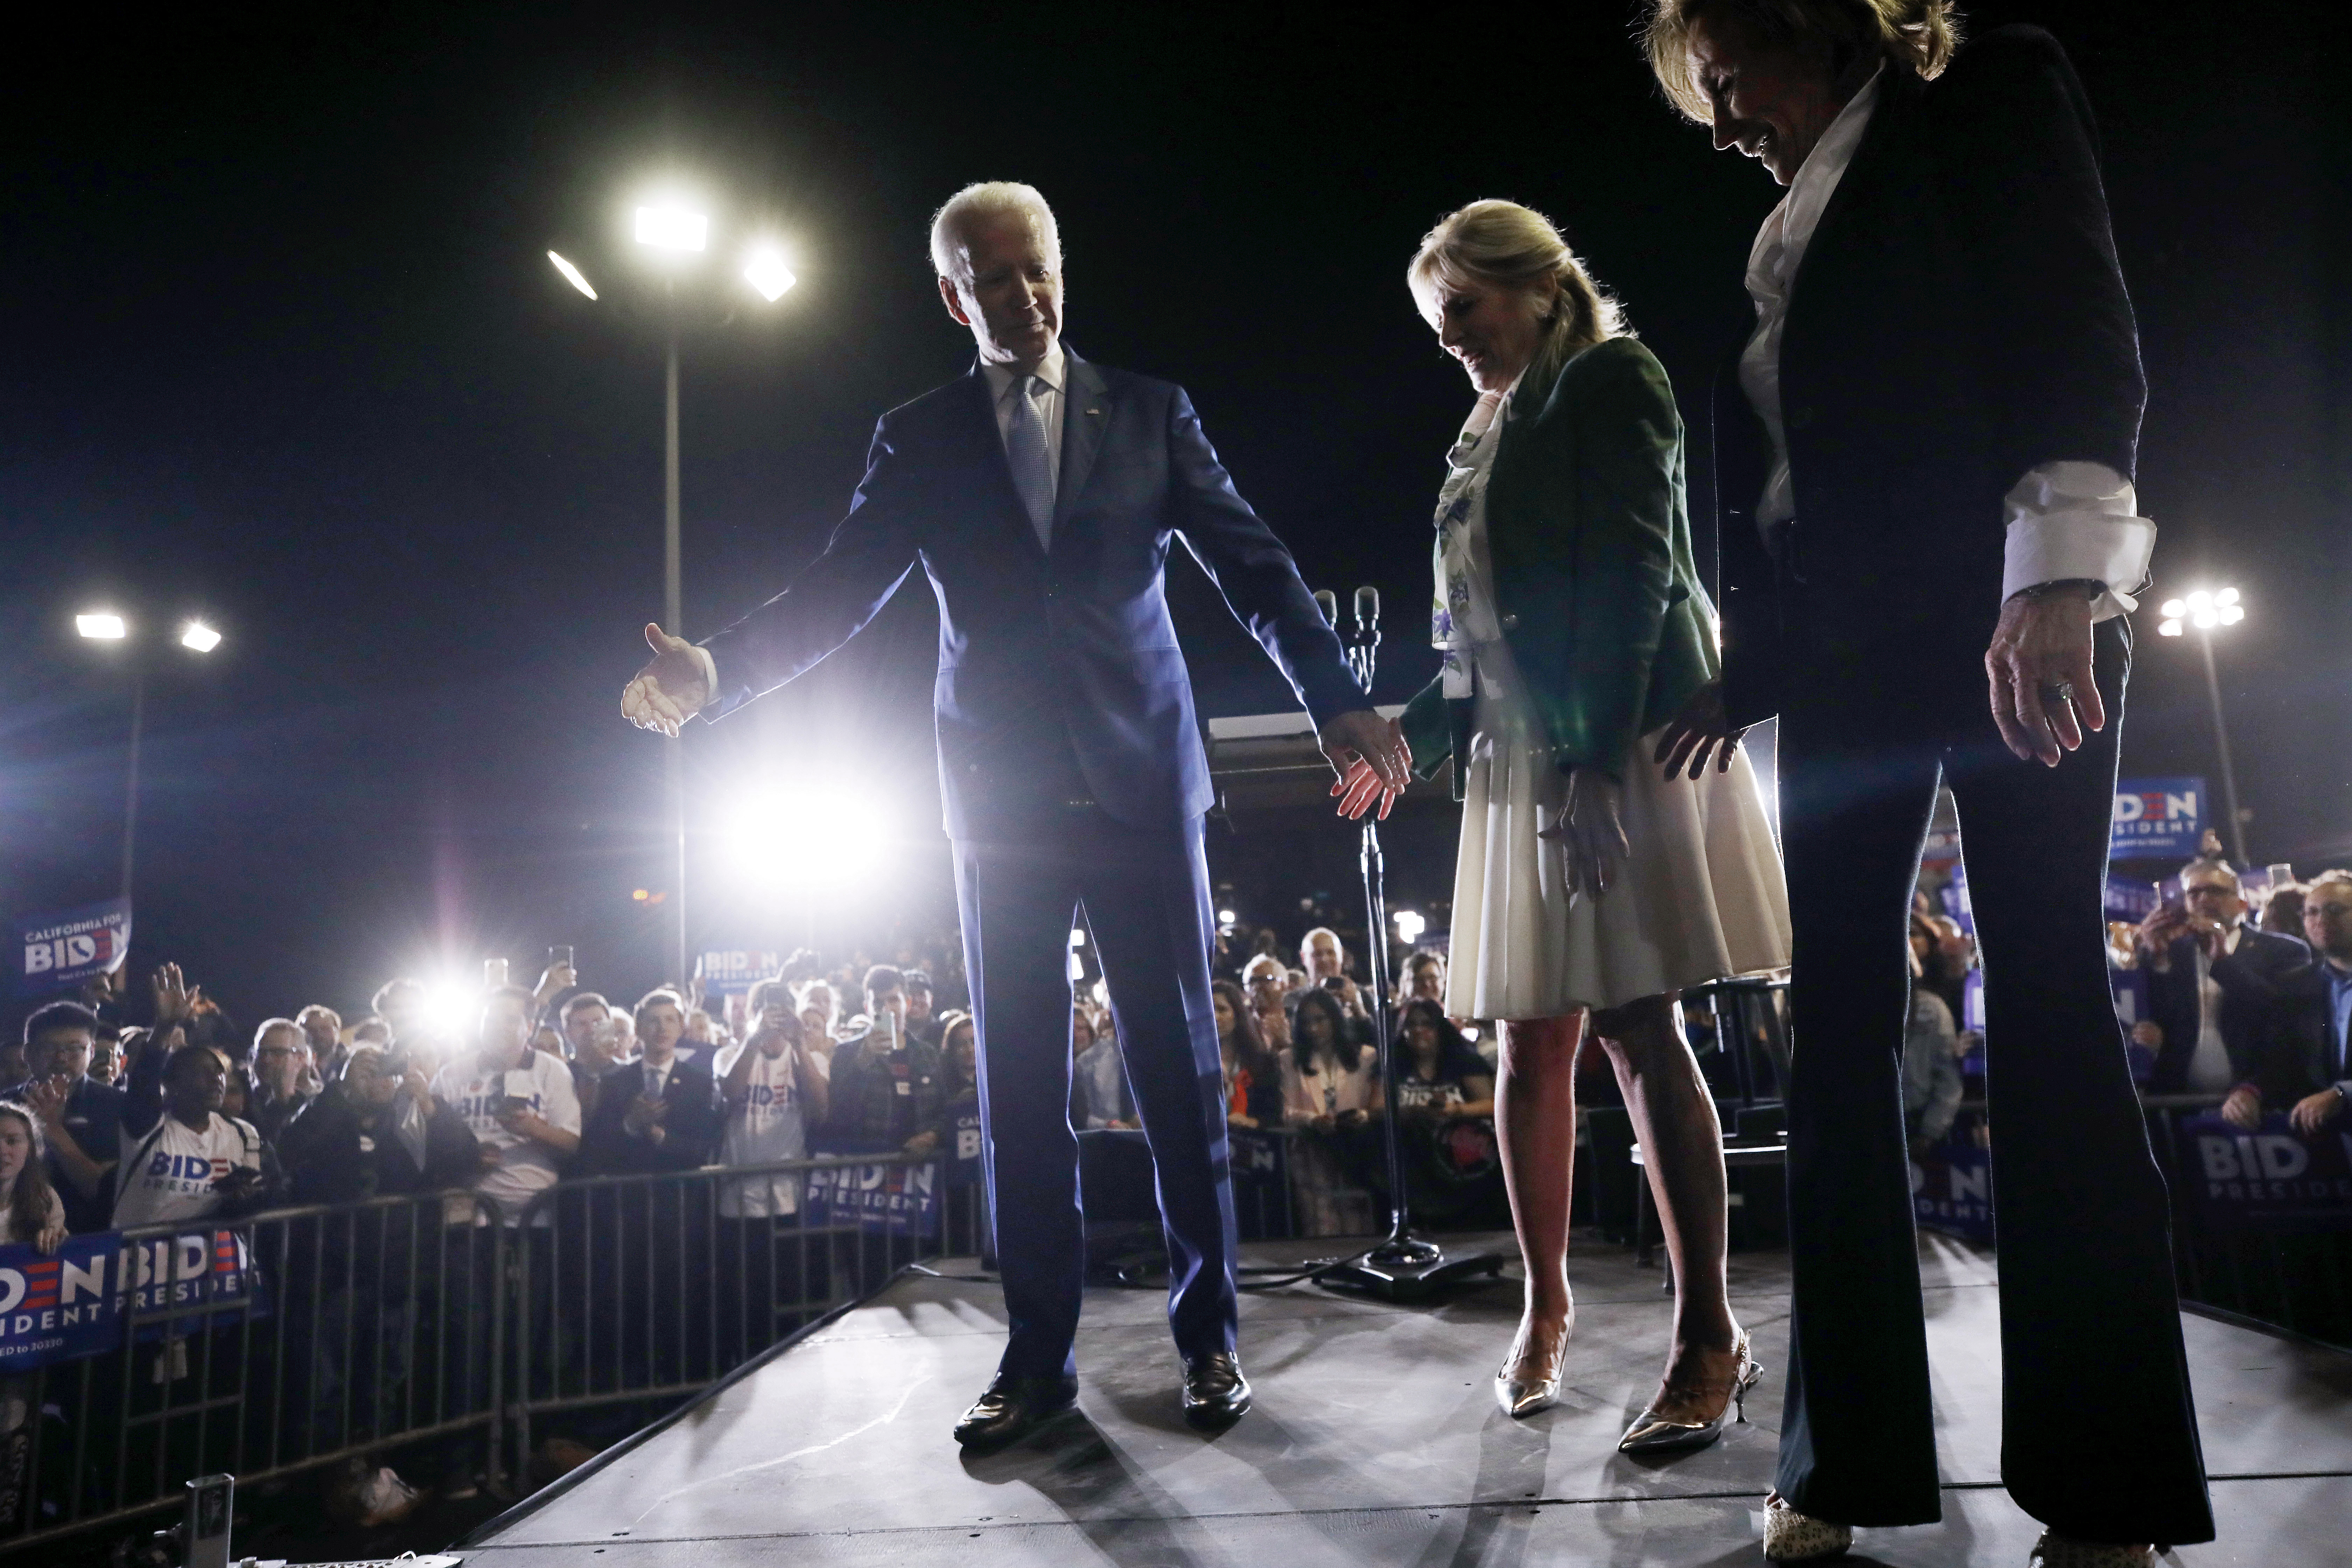 Democratic presidential candidate former Vice President Joe Biden (C) departs the stage with wife Jill (2nd R) and sister Valerie (R) at a Super Tuesday campaign event at Baldwin Hills Recreation Center on March 3, 2020 in Los Angeles, California. (Mario Tama/Getty Images)